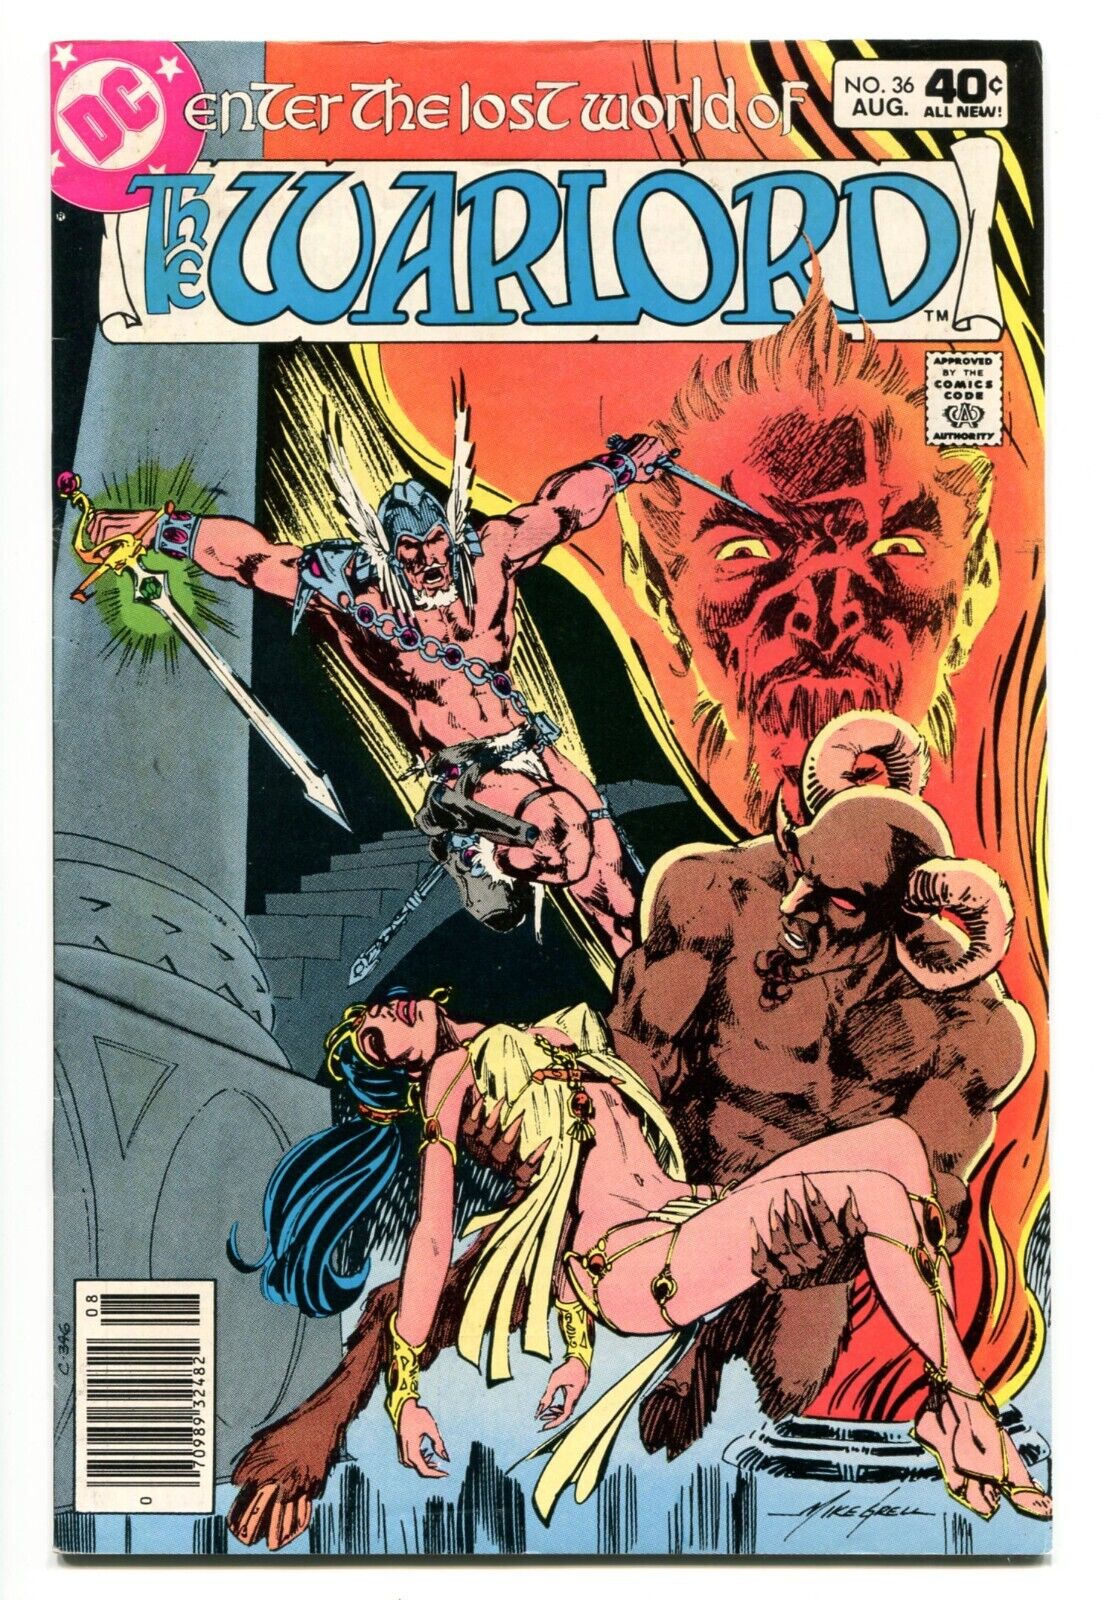 WARLORD, Issue #36, (DC 1976), FN-